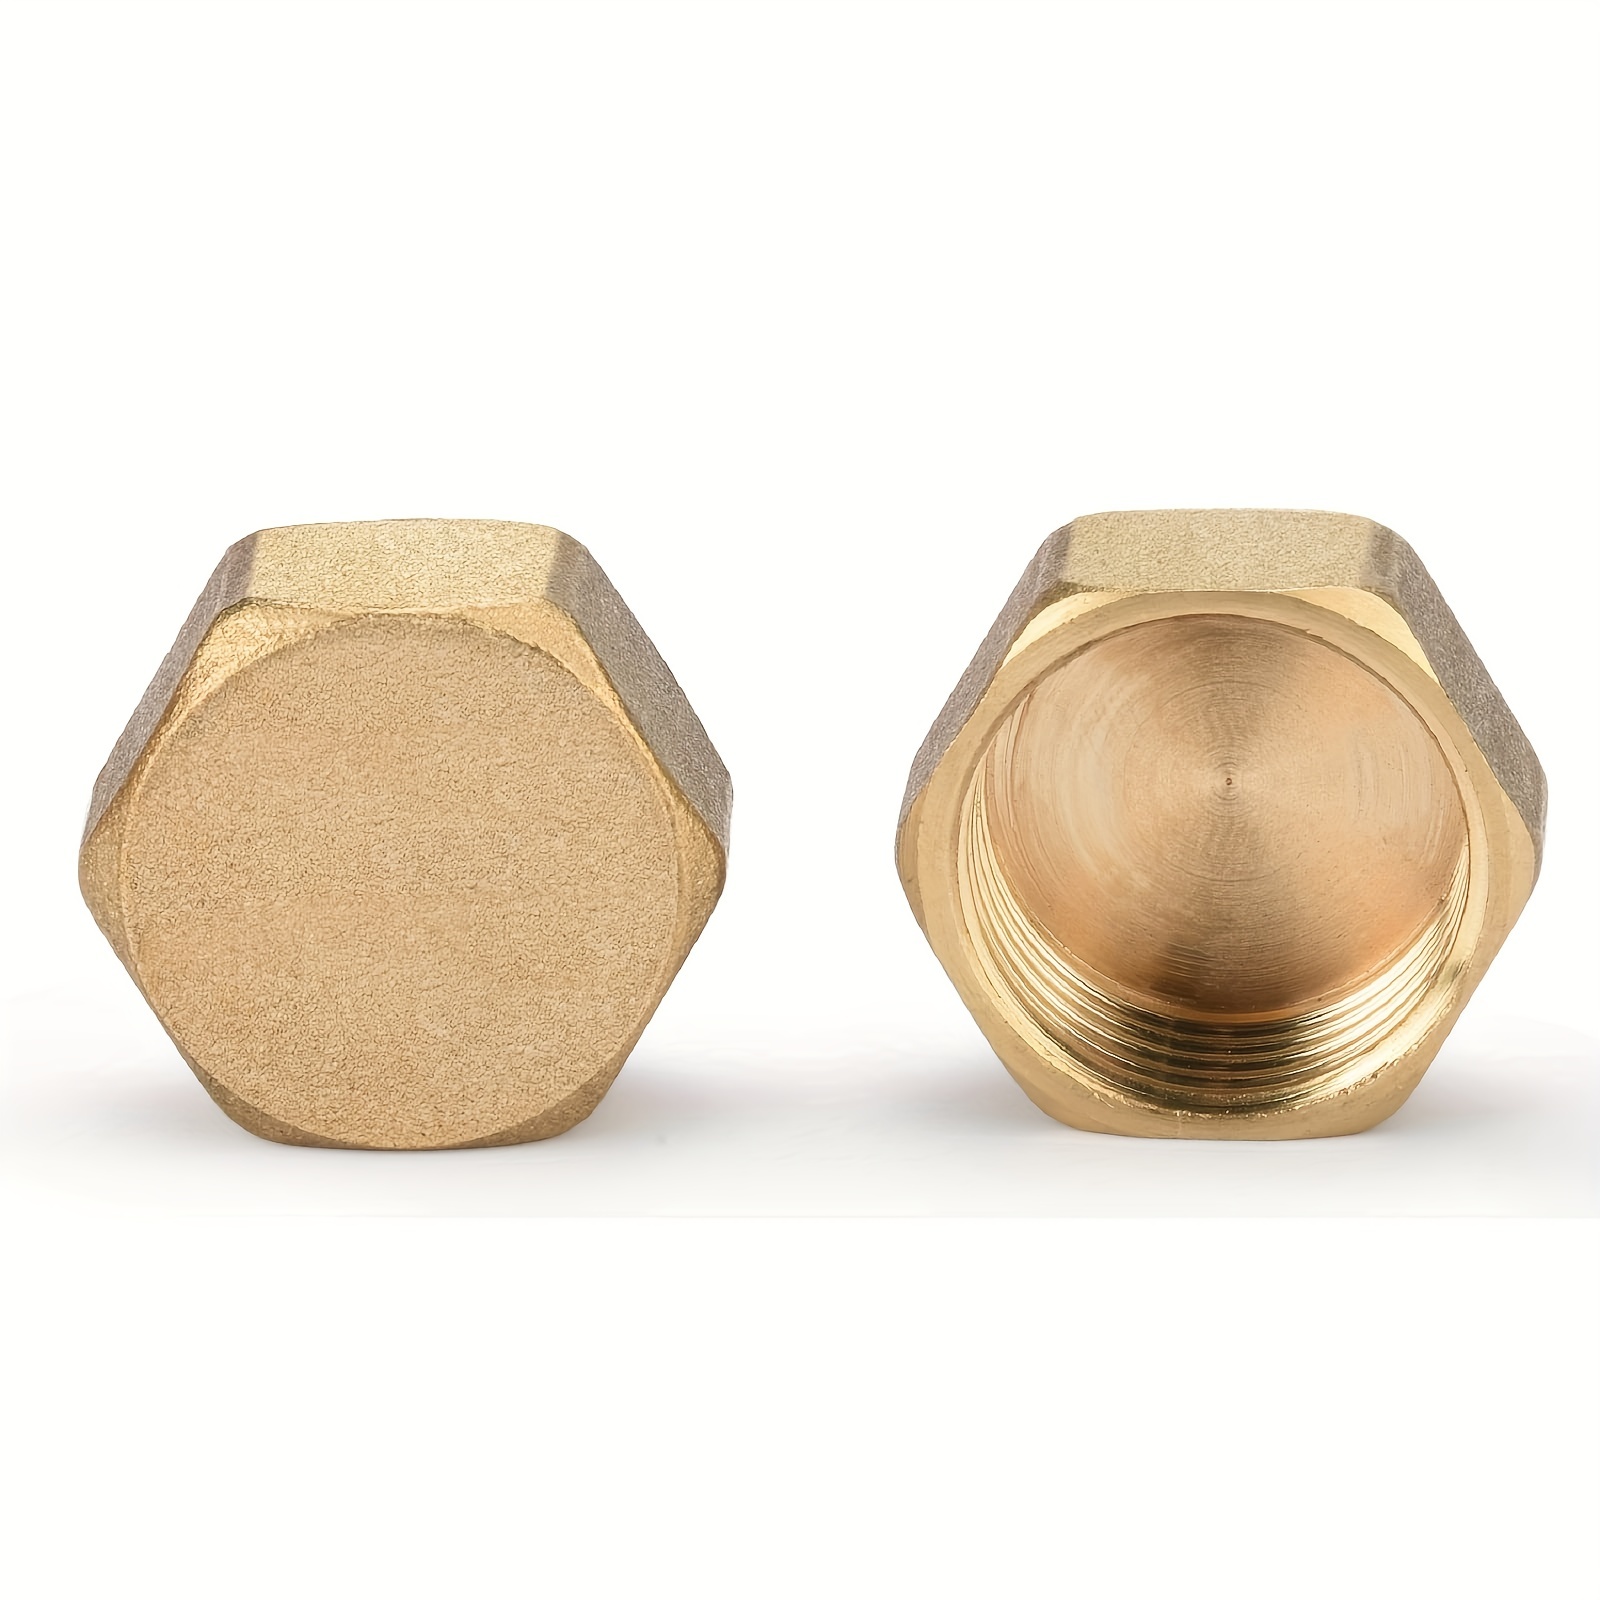 Solid Brass Hex Head Pipe Plugs - Pipe Thread